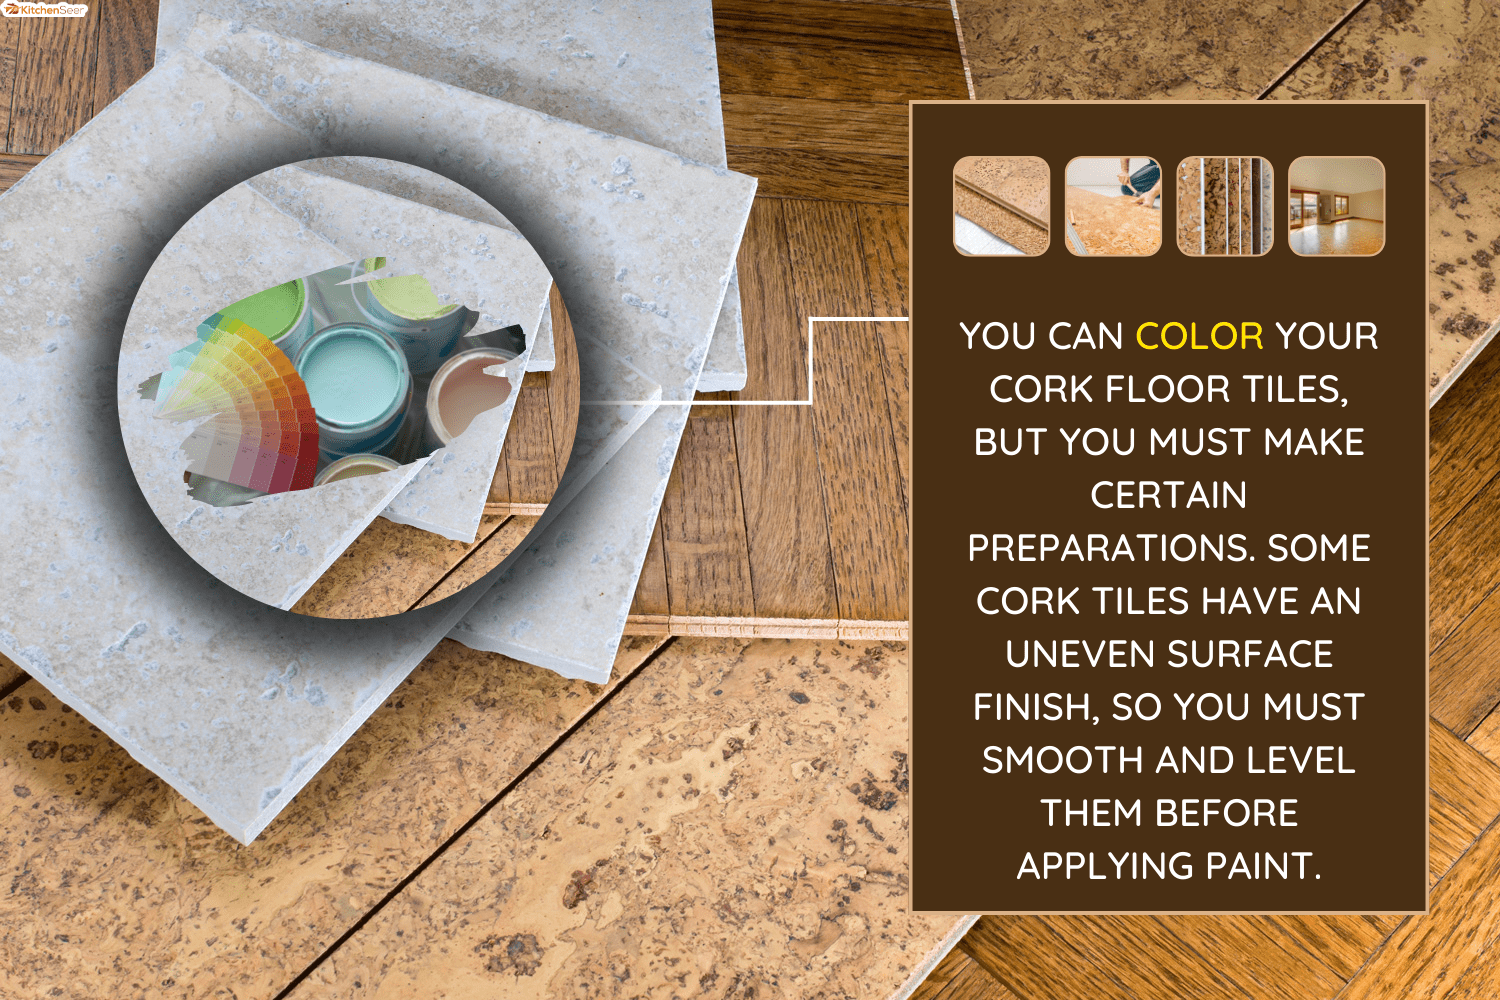 ceramic tile, cork and parquet wooden flooring samples for home interior remodel - Can You Paint Cork Floor Tiles Should You